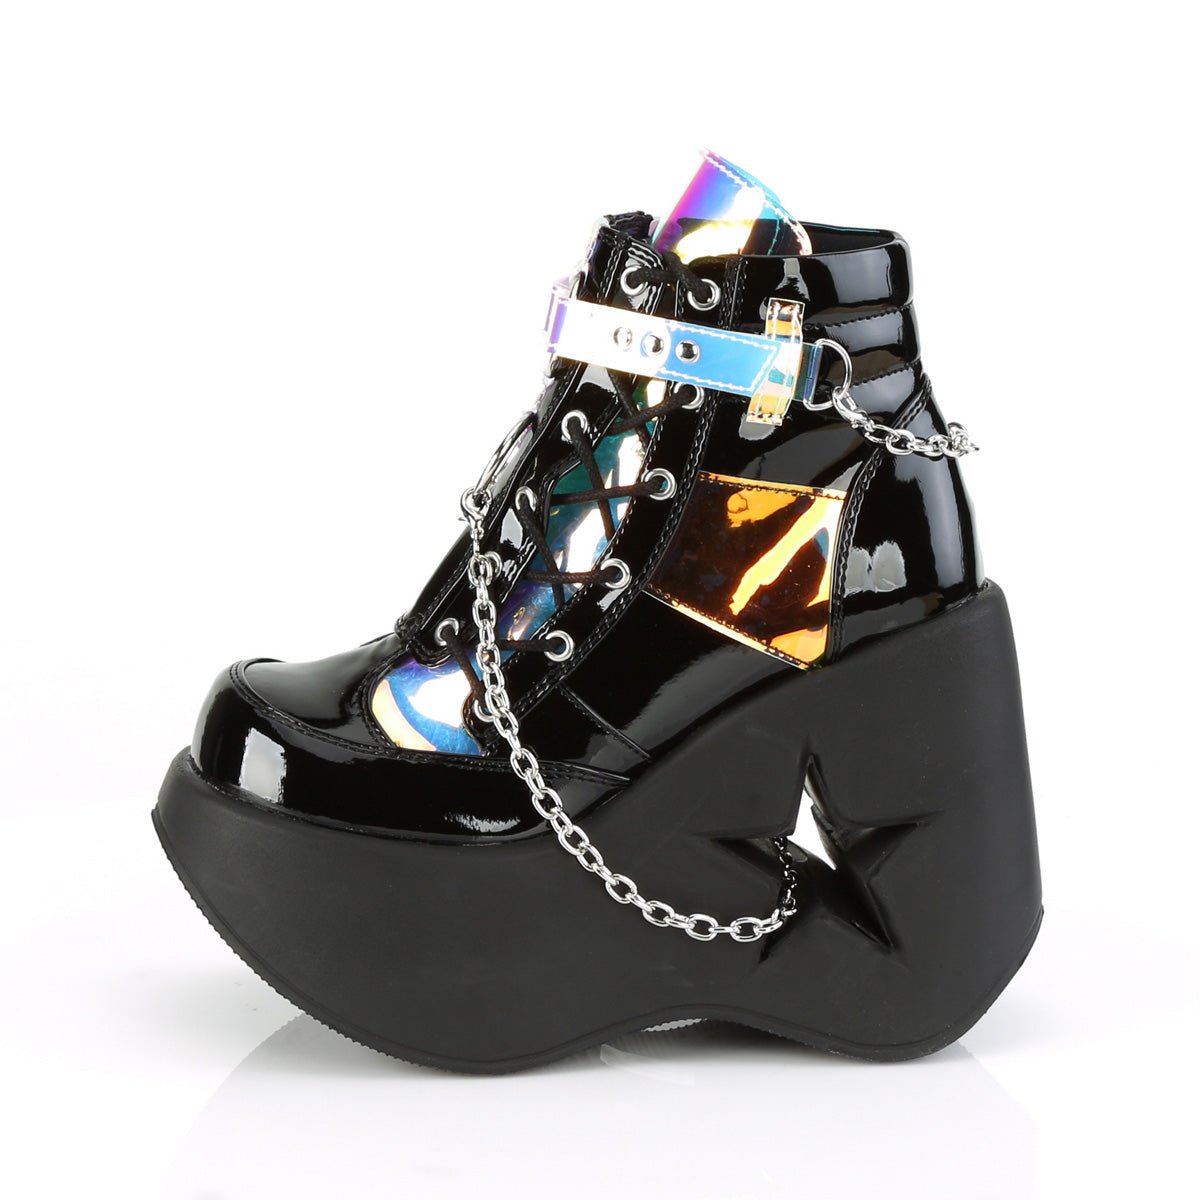 Too Fast | Demonia Dynamite 101 | Black Patent Leather & Magic Mirror Tpu (Thermoplastic Polyurethane) Women's Ankle Boots